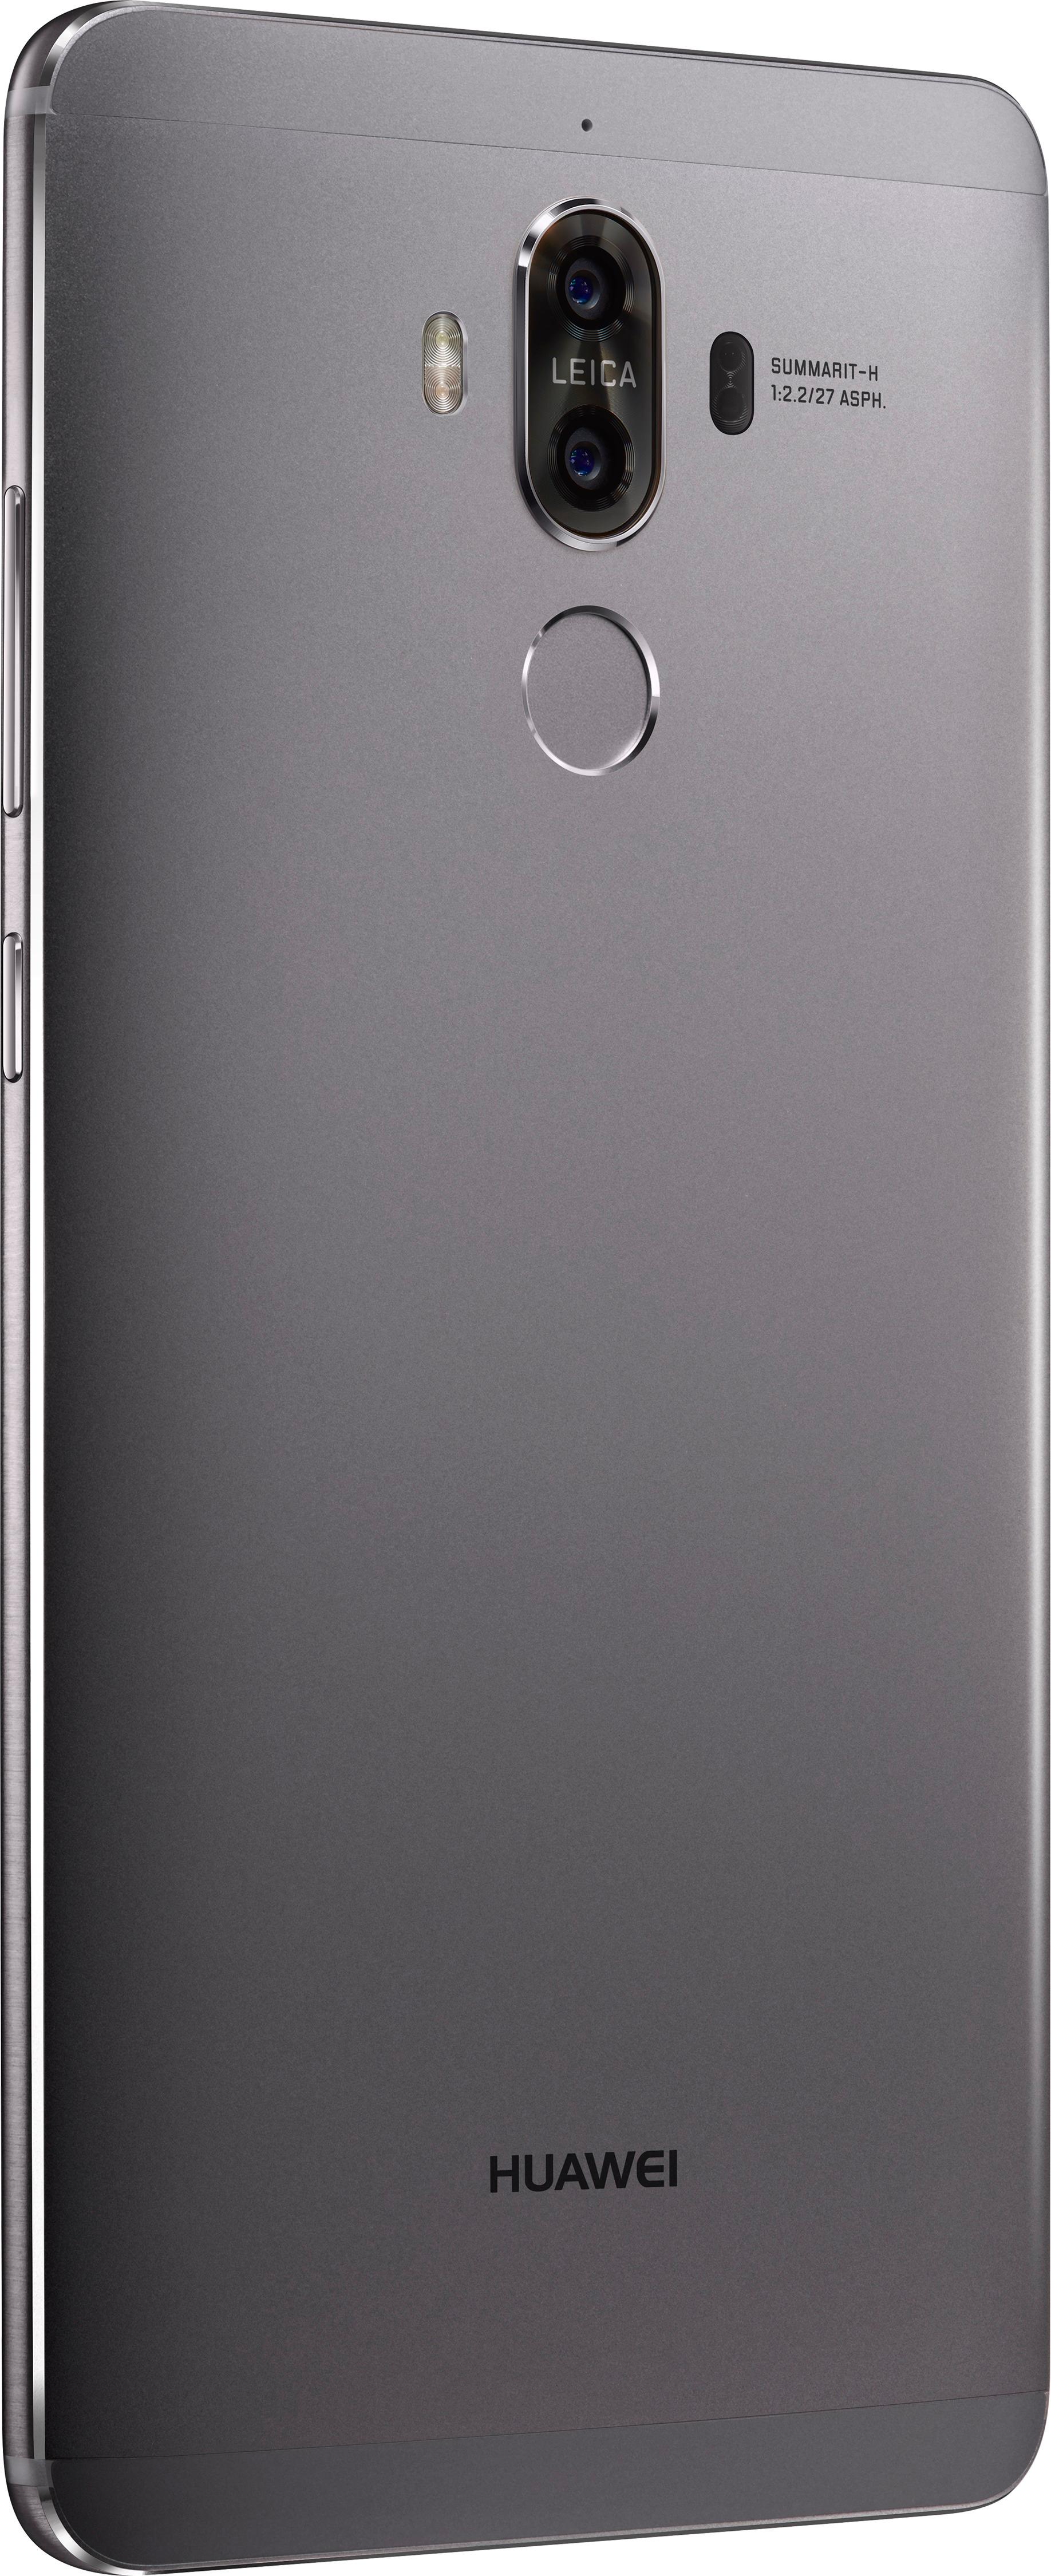 Best Buy: Huawei Refurbished Mate 9 4G LTE with 64GB Memory Cell Phone  (Unlocked) Space Gray RFRB-MHA-L29